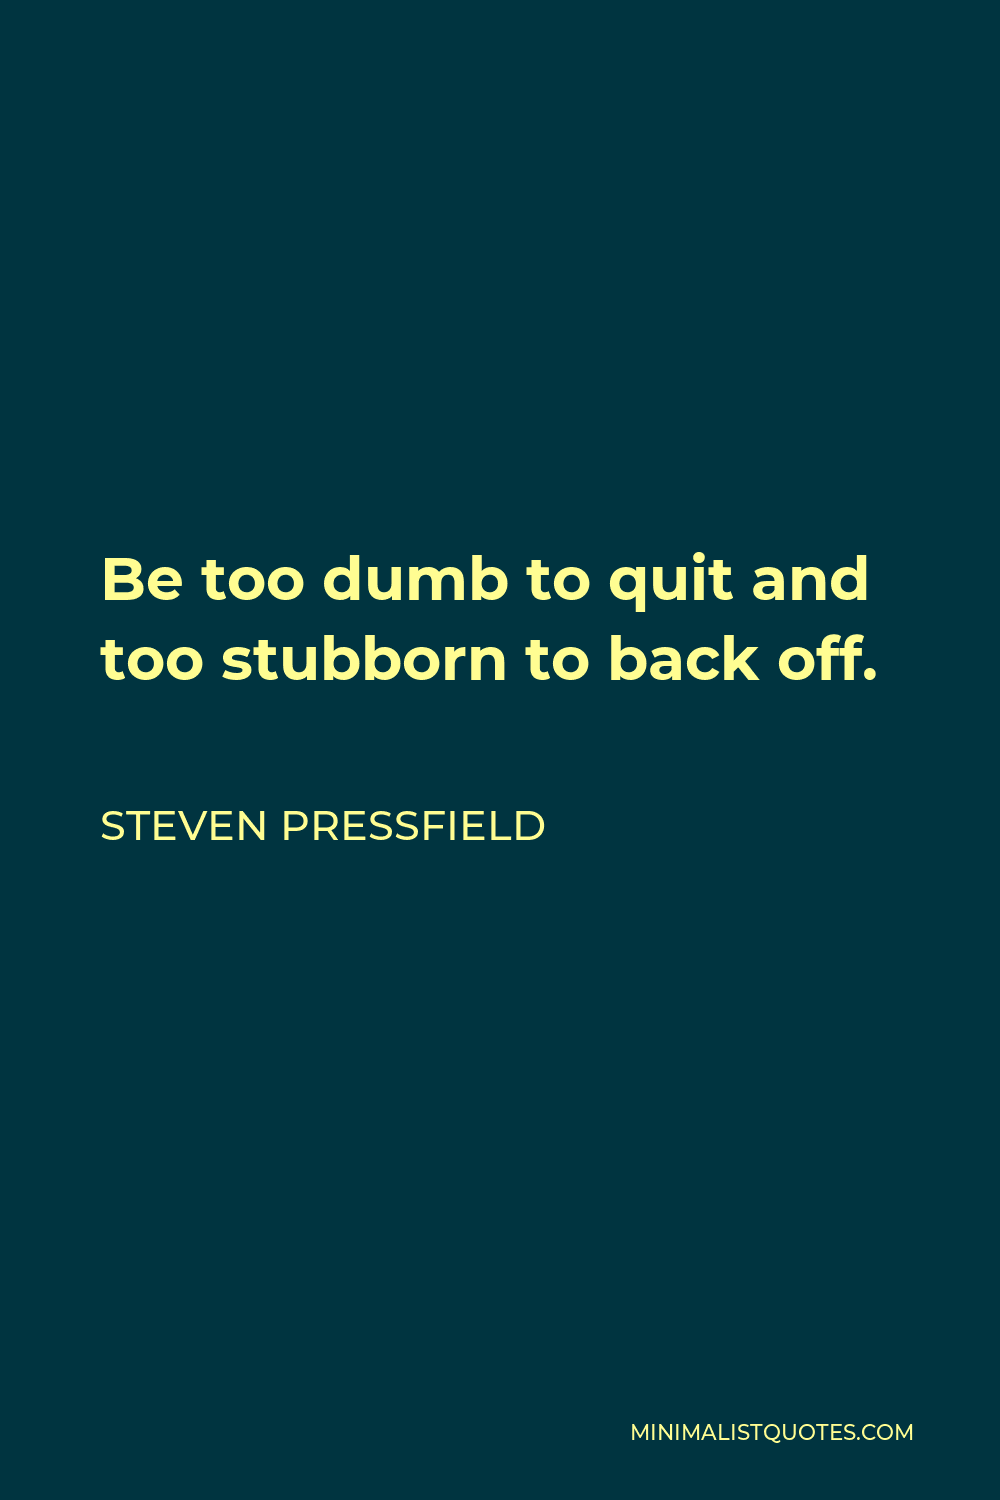 Steven Pressfield Quote - Be too dumb to quit and too stubborn to back off.